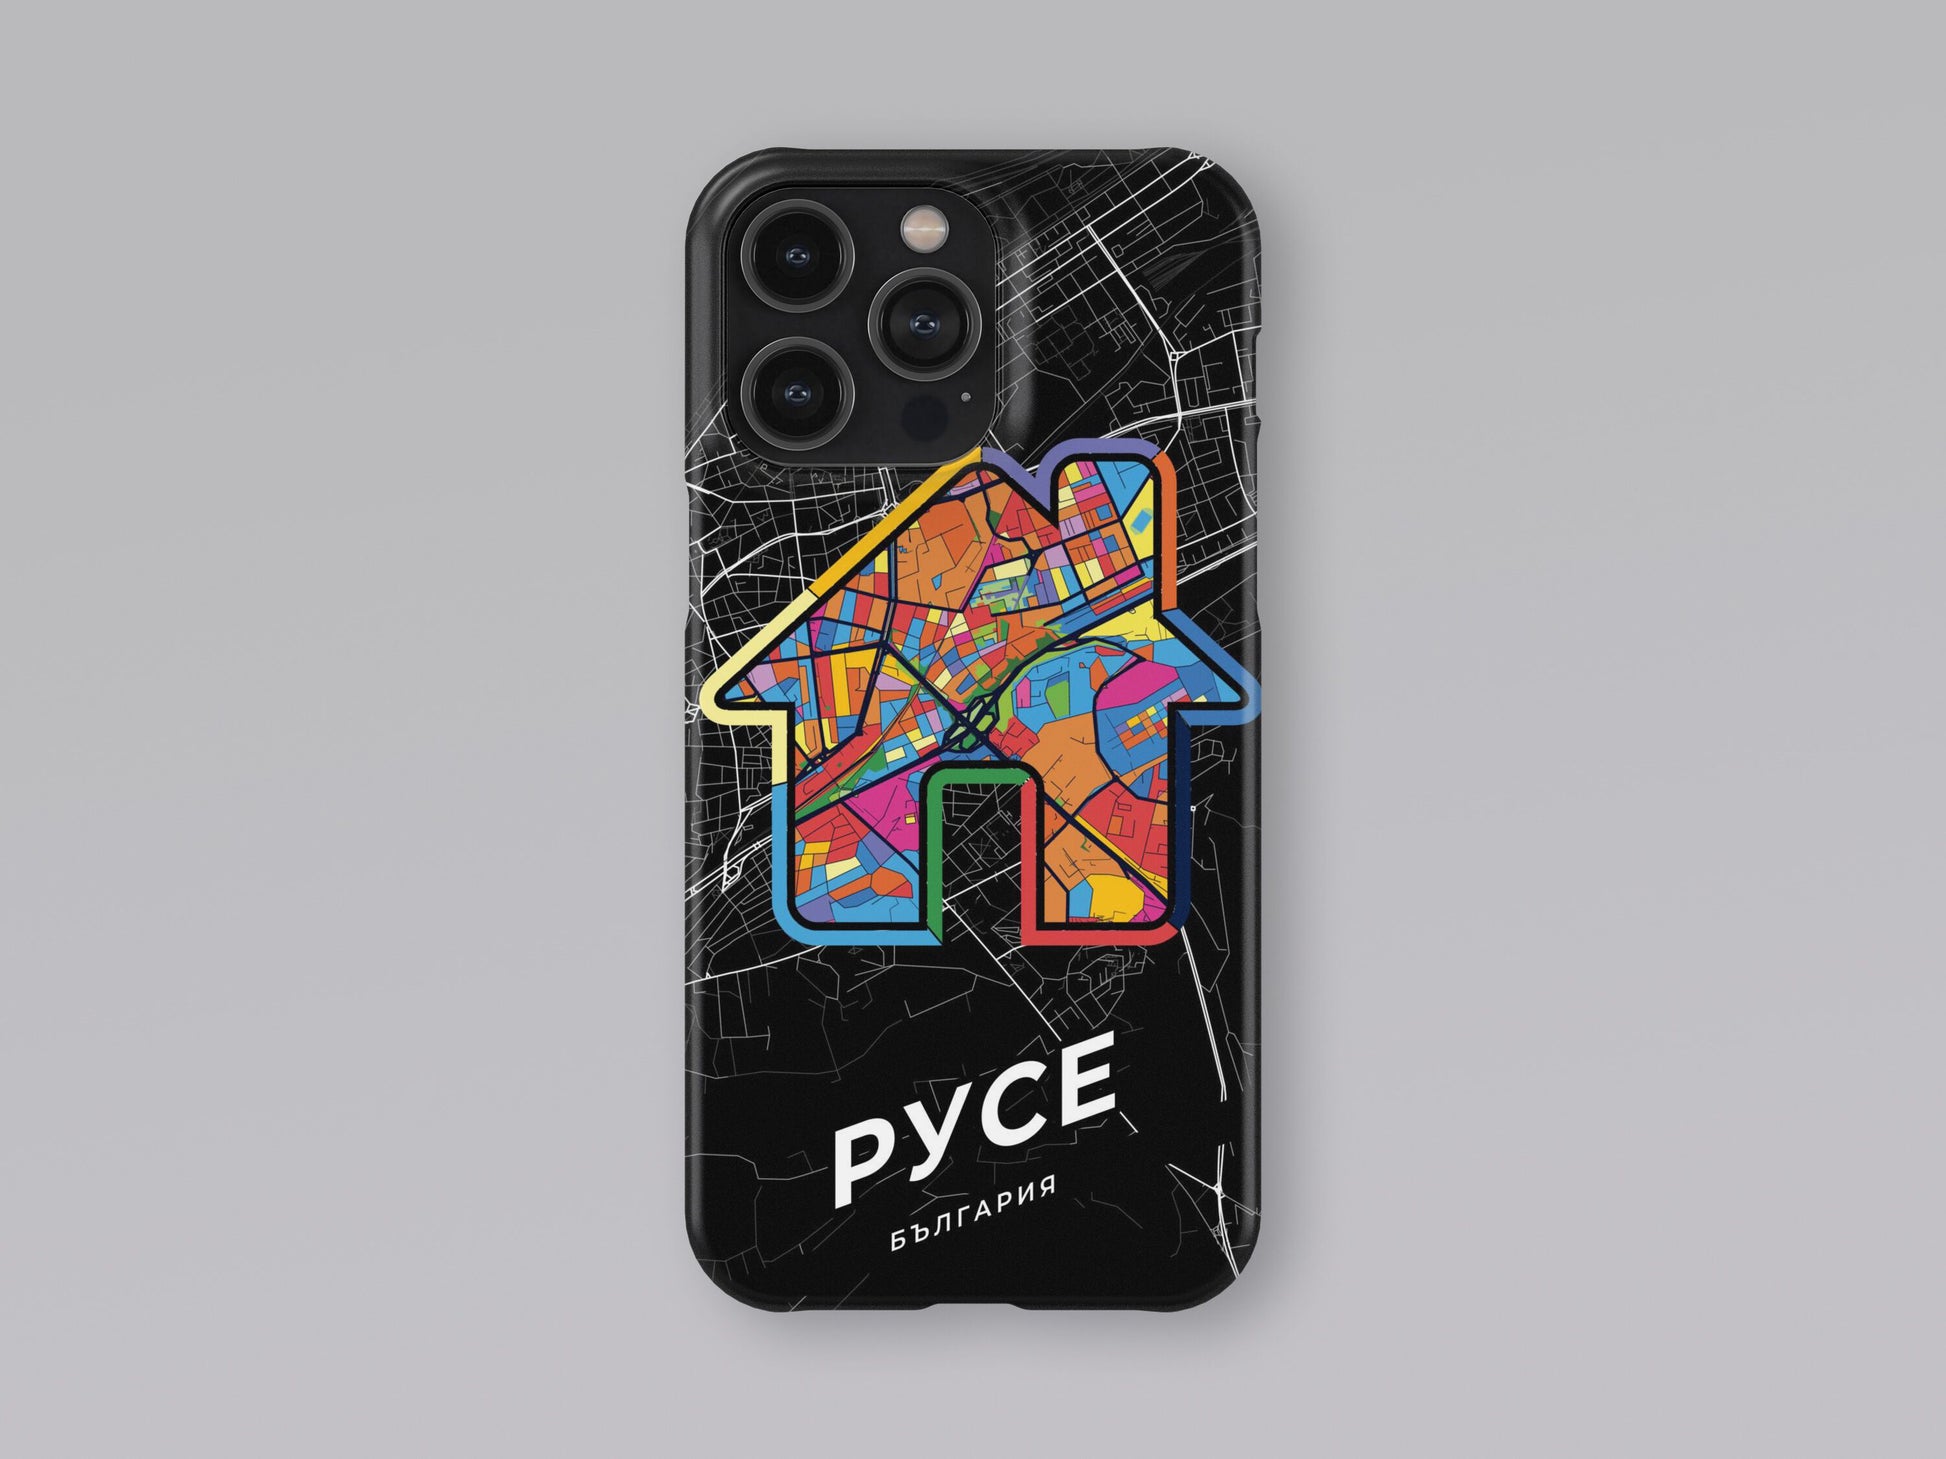 Русе България slim phone case with colorful icon. Birthday, wedding or housewarming gift. Couple match cases. 3